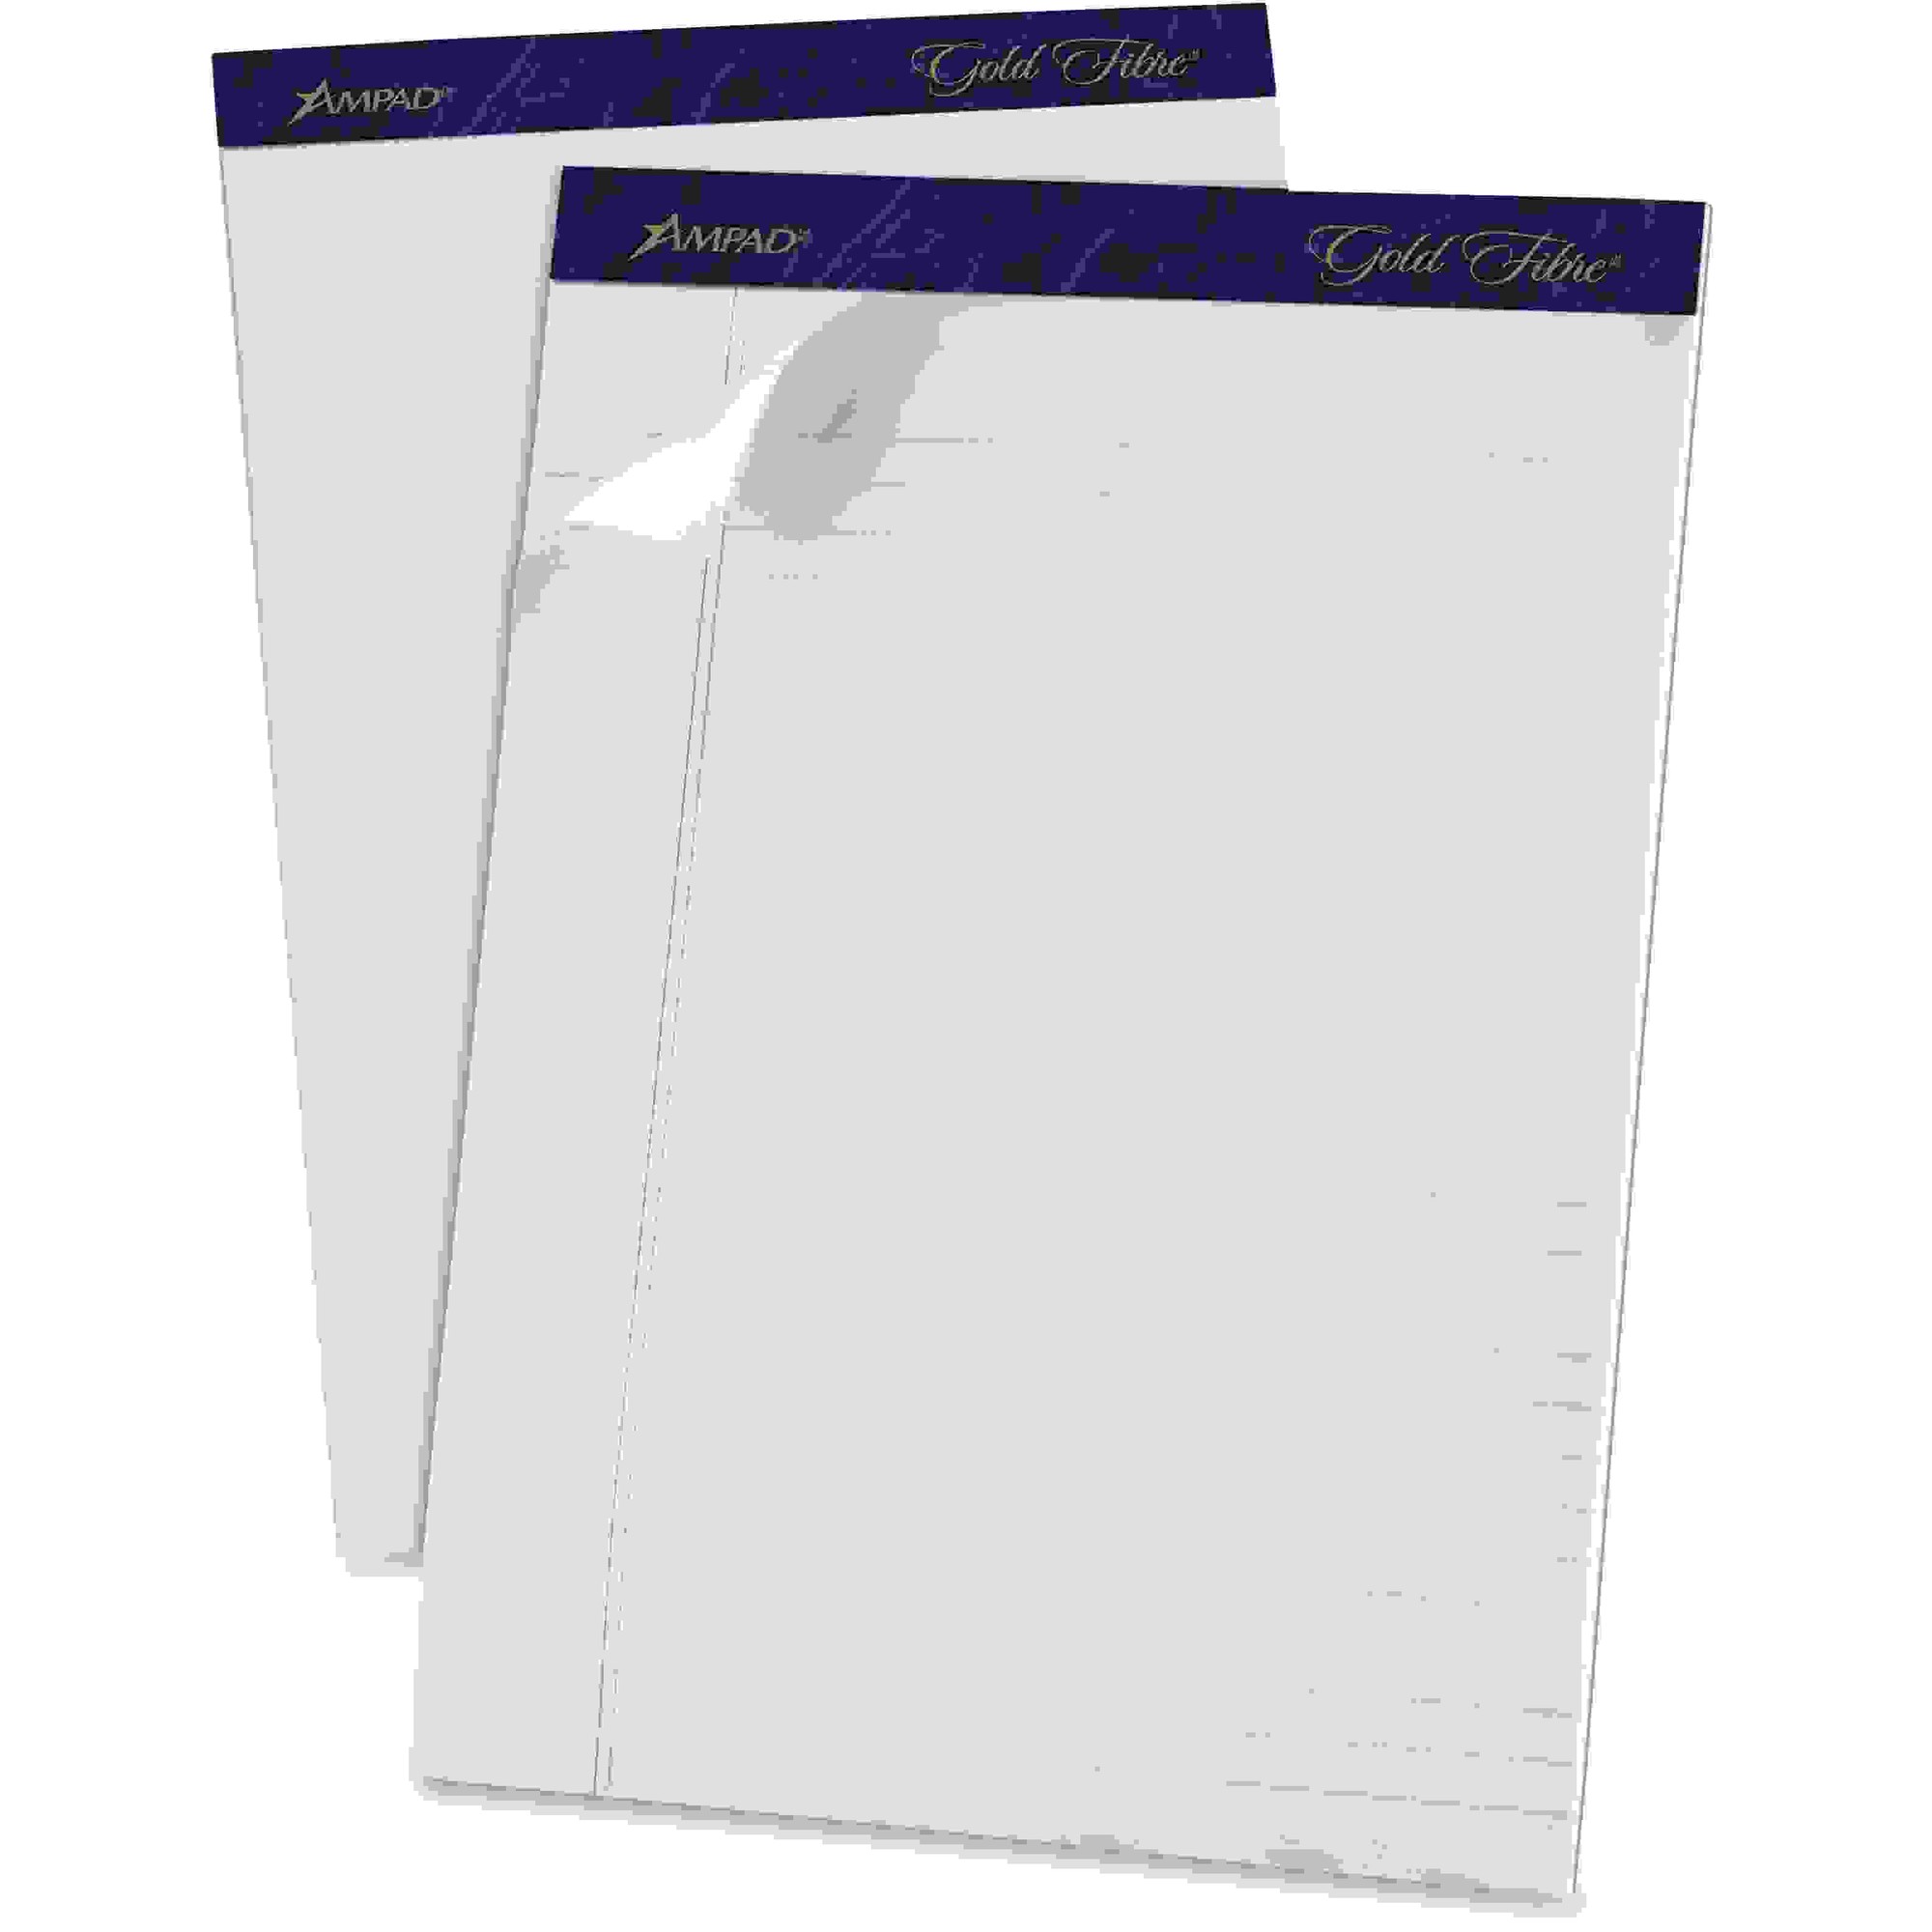 TOPS Gold Fibre Ruled Perforated Writing Pads - Letter - 50 Sheets - Watermark - Stapled/Glued - Front Ruling Surface - 0.34" Ru